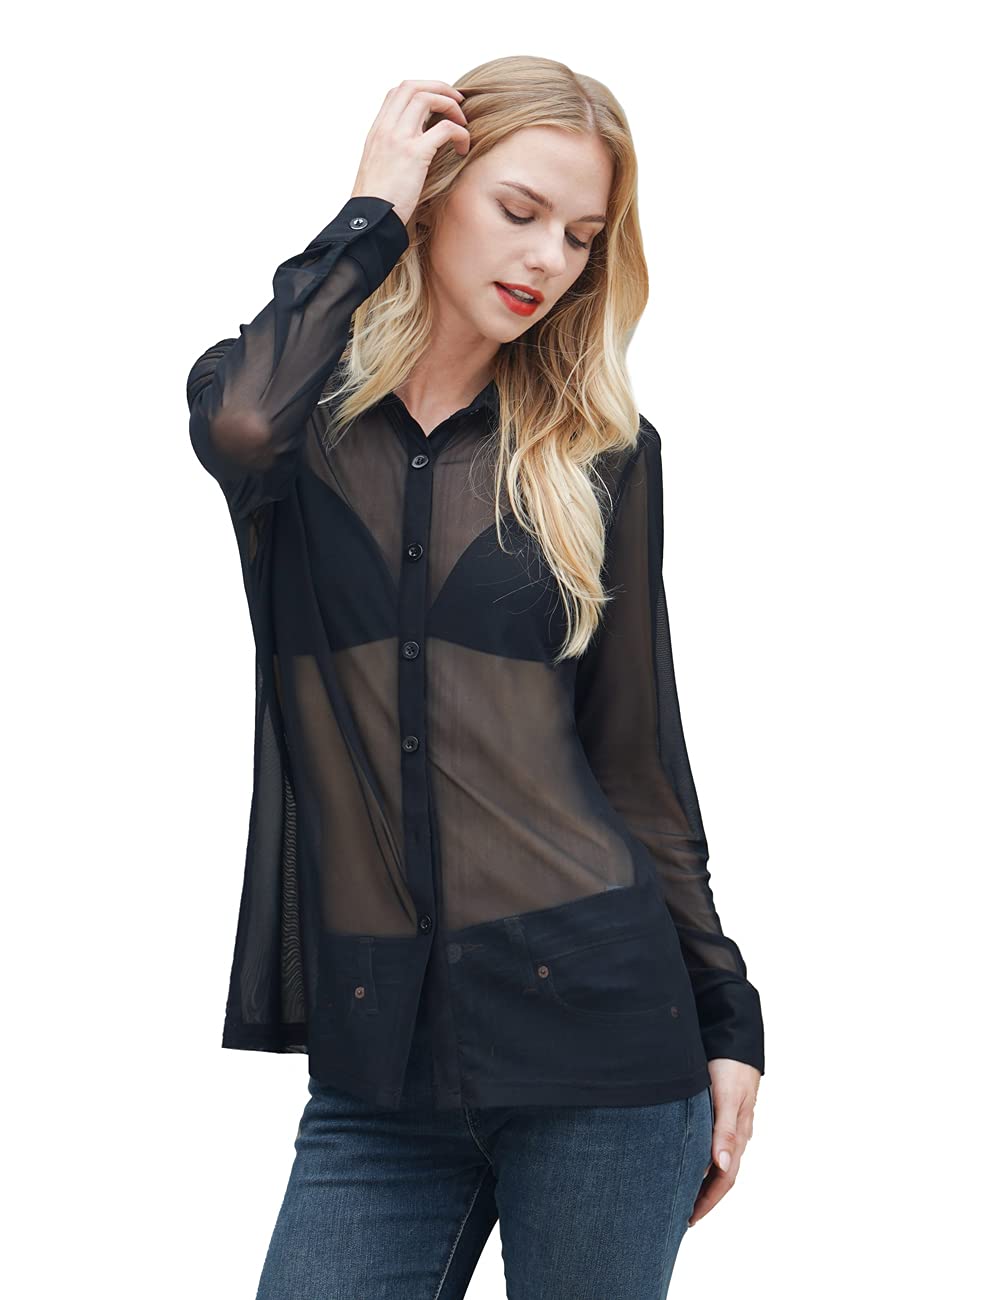 BAISHENGGT Solid Black Womens Sexy Mesh Sheer Tops Long Sleeve Button Down Shirts Blouses